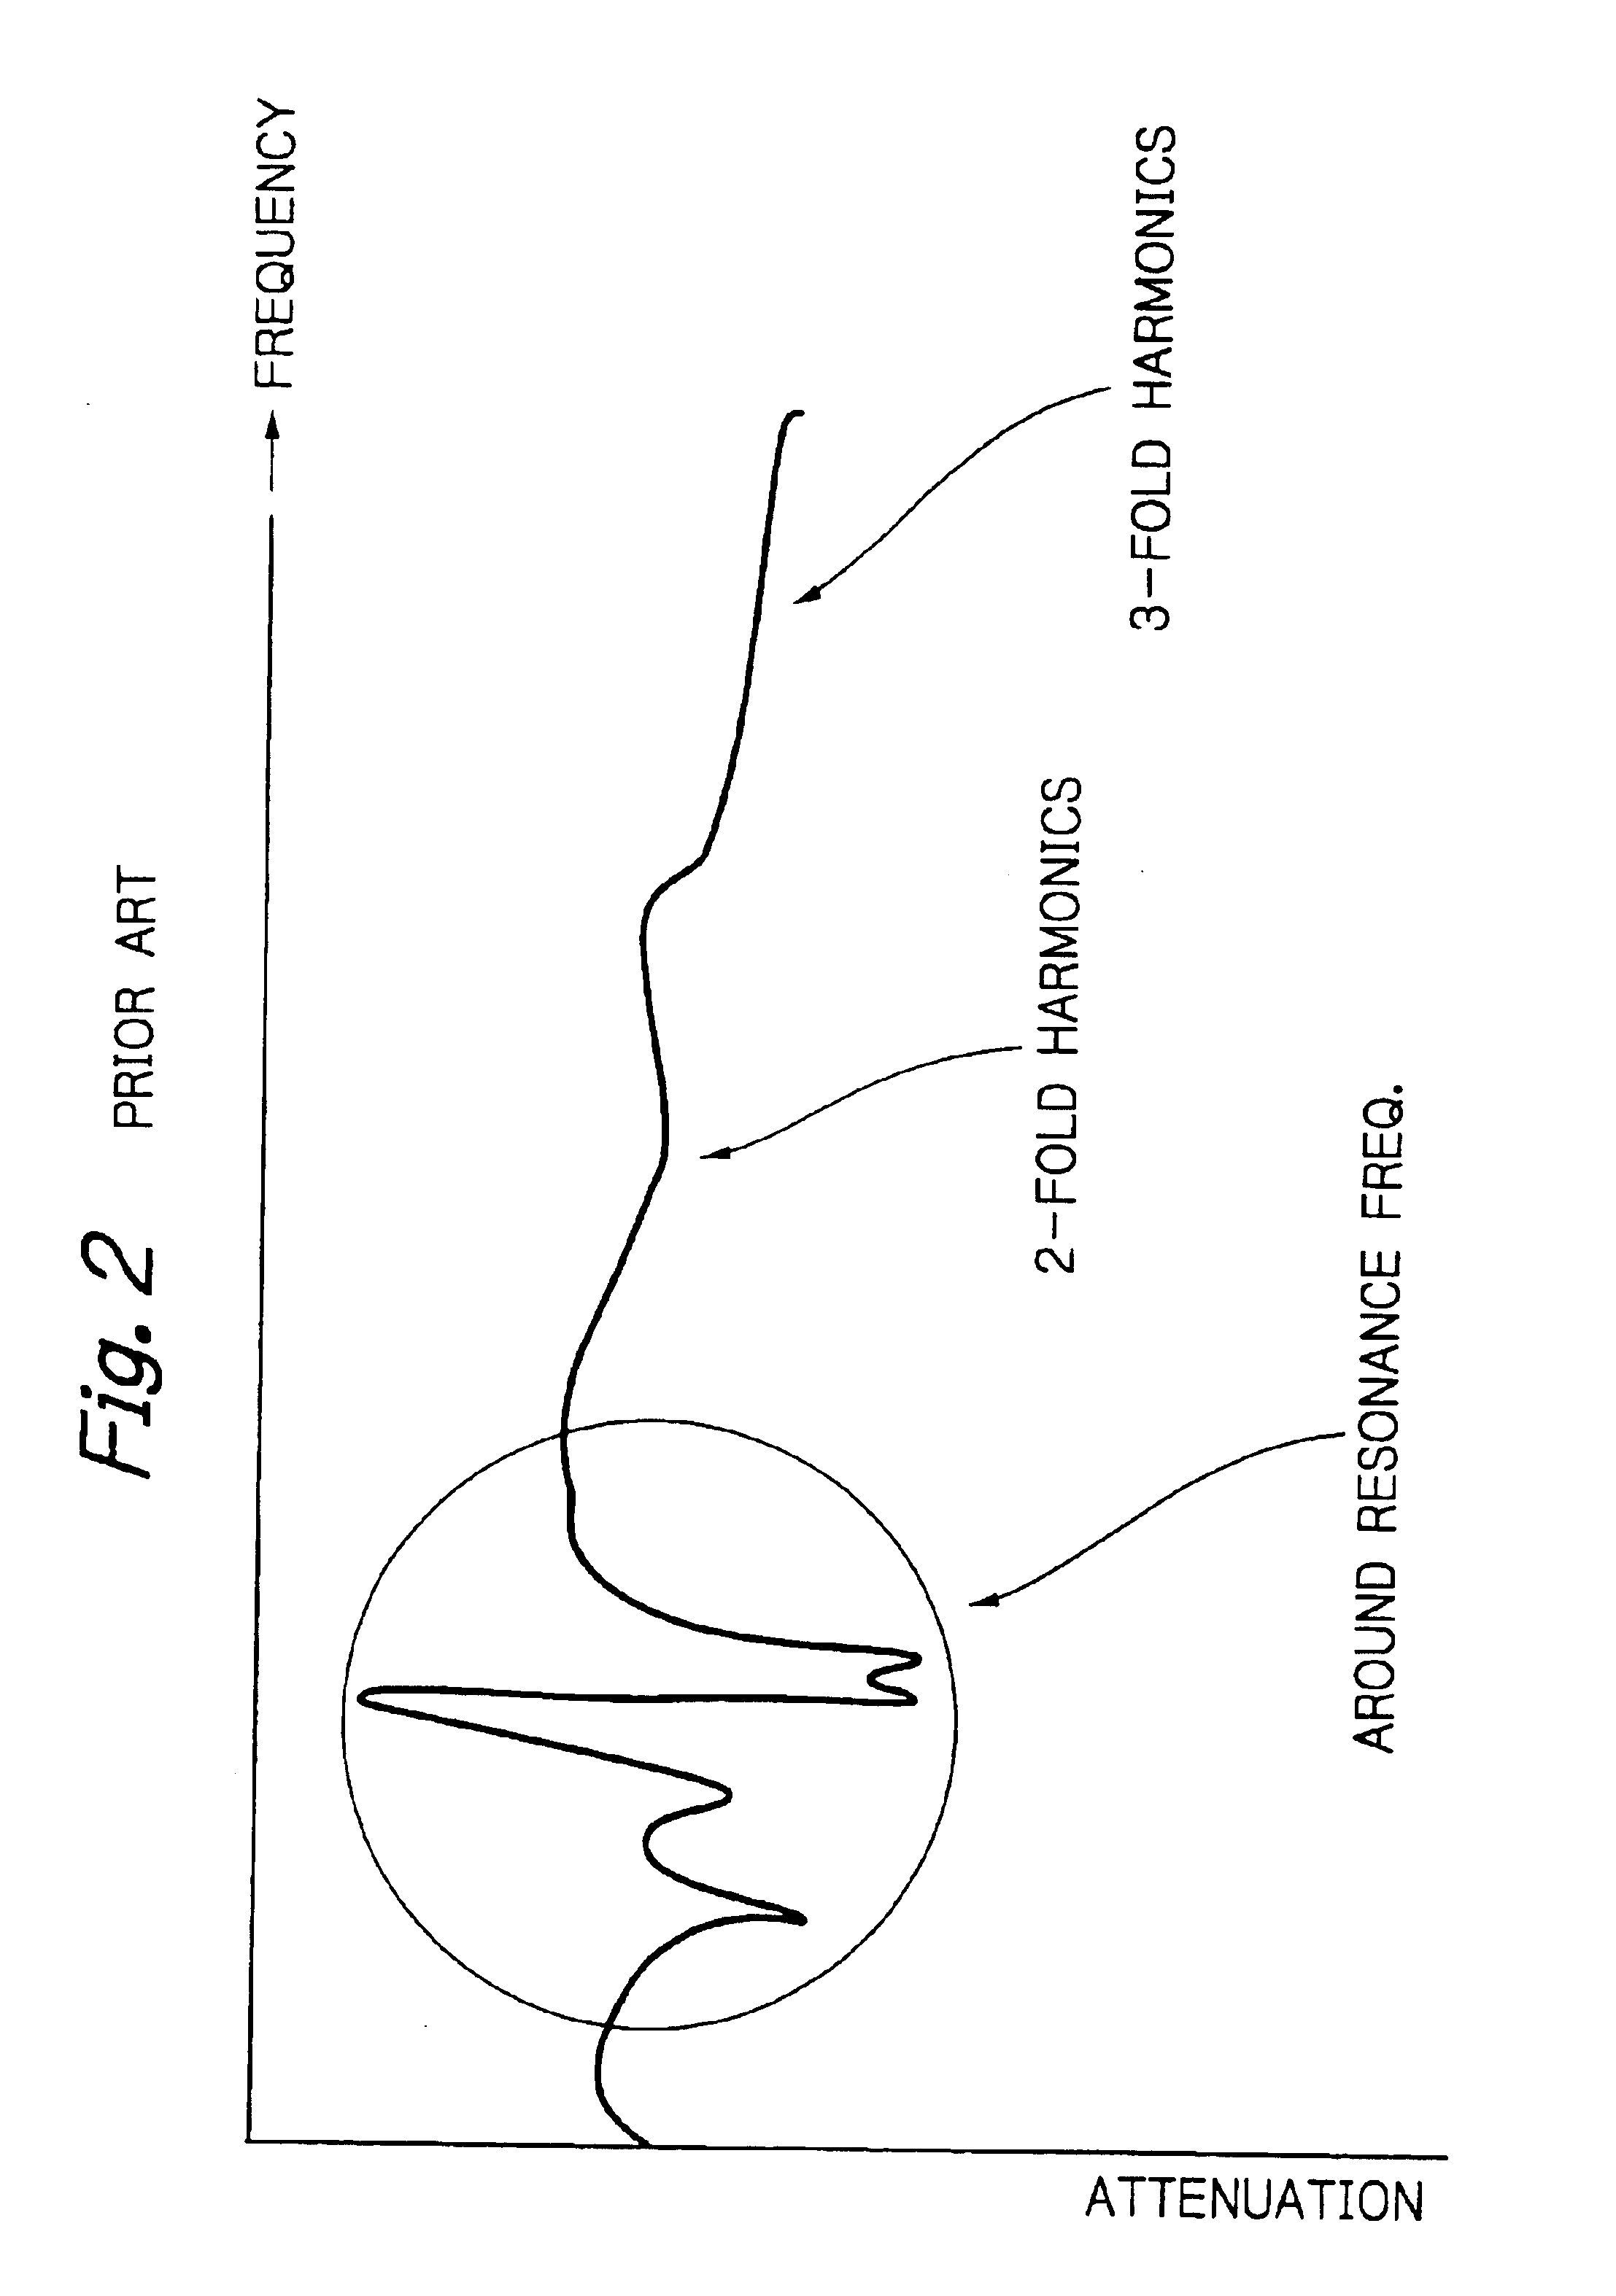 SAW filter with an improved attenuation characteristic at a frequency any multiple of an attenuation pole frequency at one or both sides of a pass band